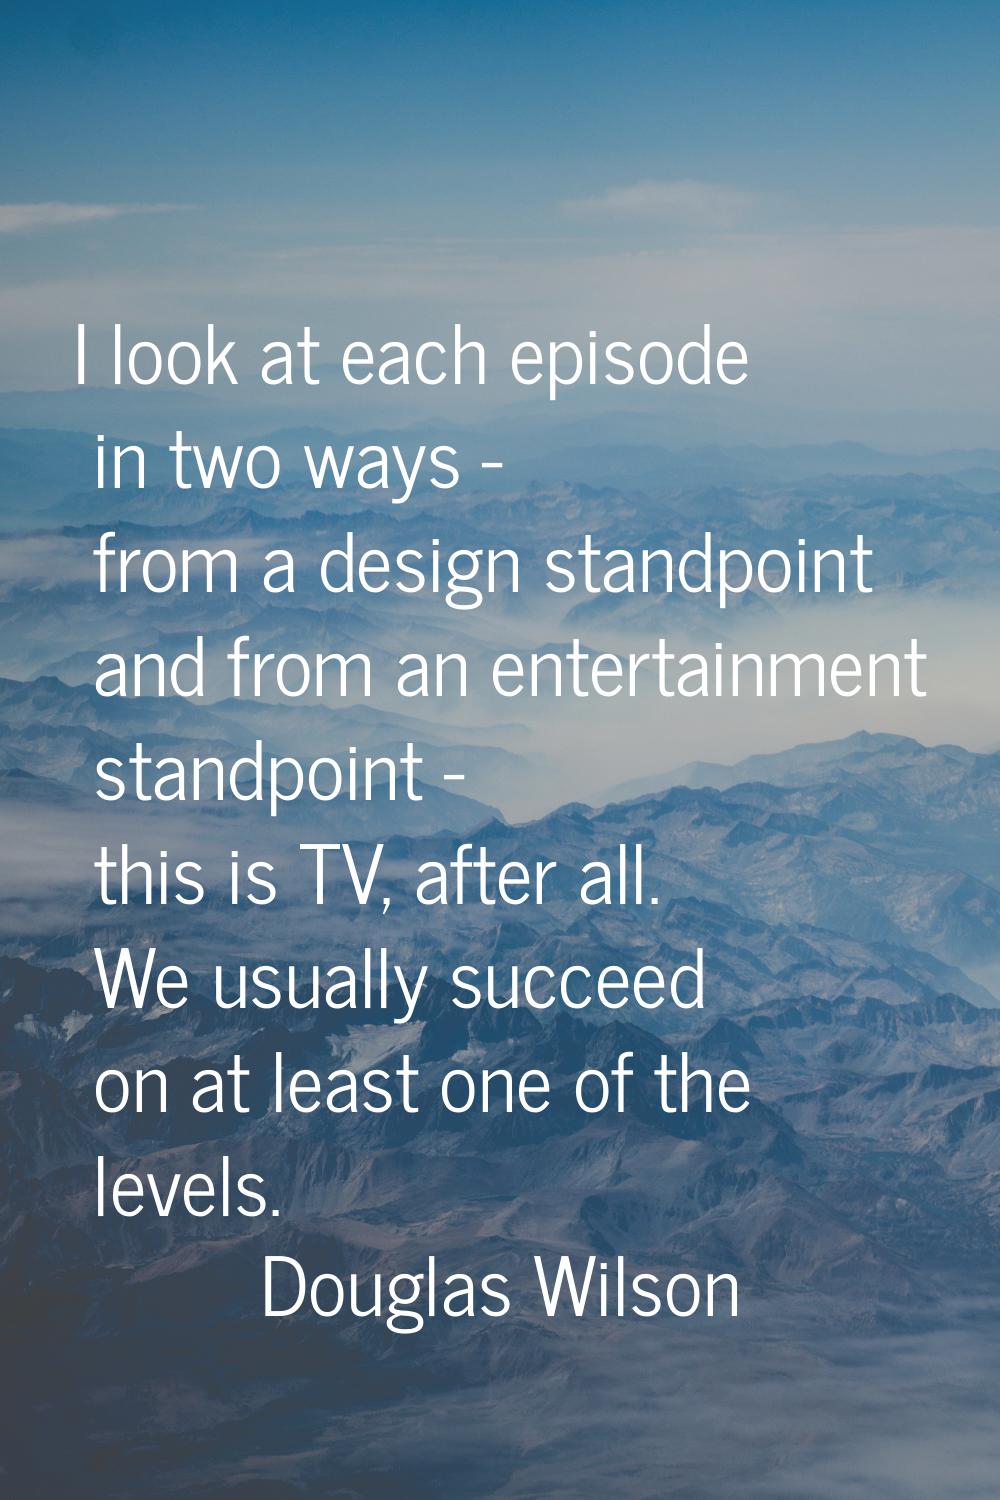 I look at each episode in two ways - from a design standpoint and from an entertainment standpoint 